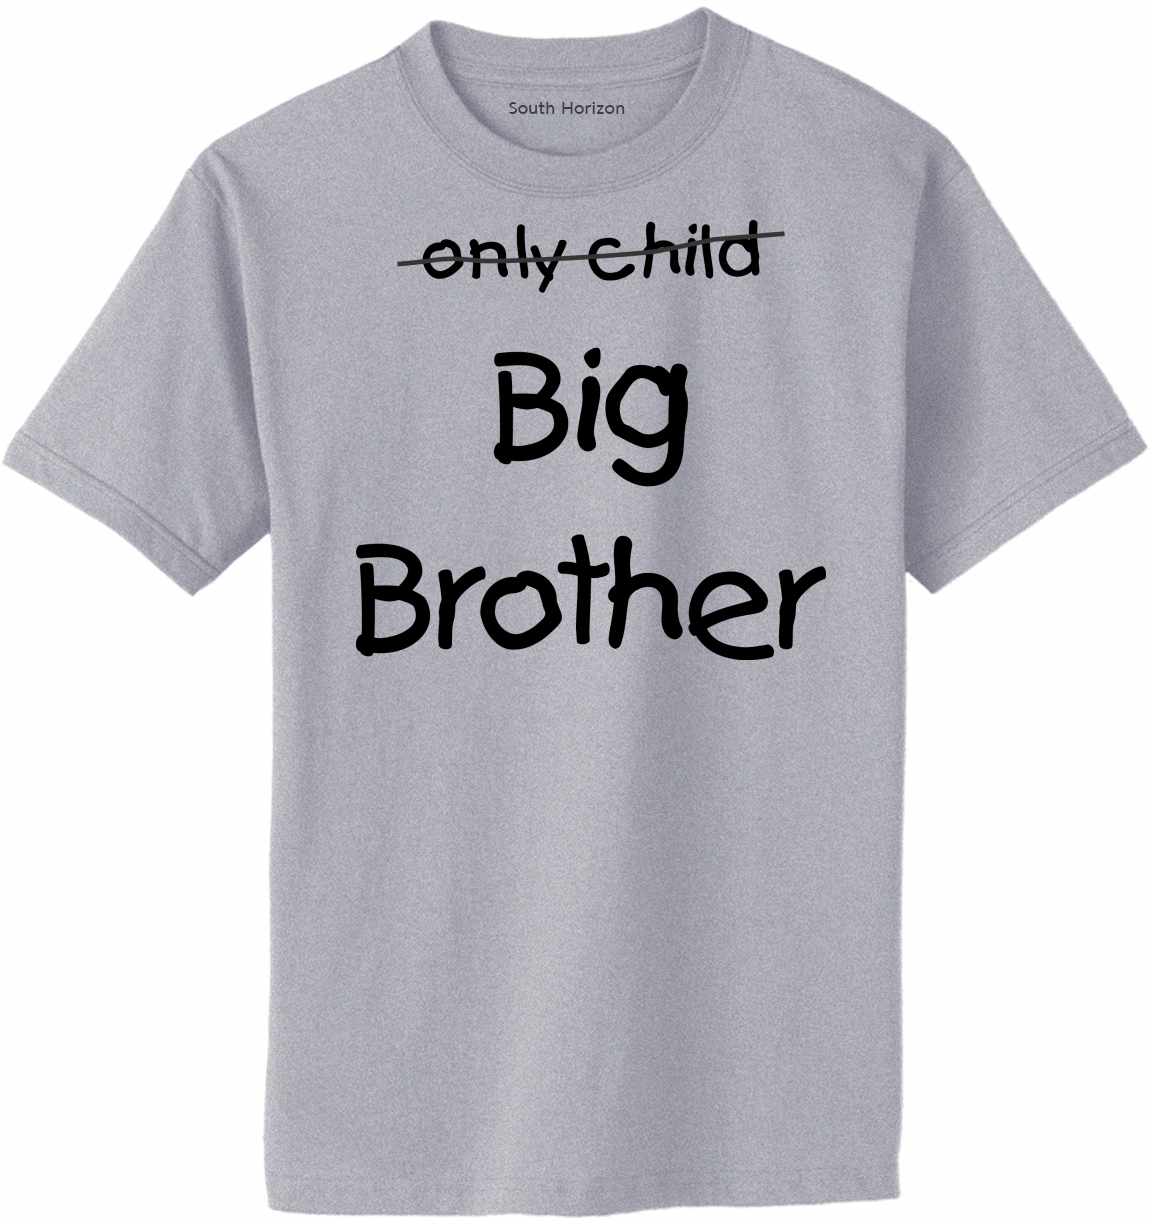 Only Child BIG BROTHER on Adult T-Shirt